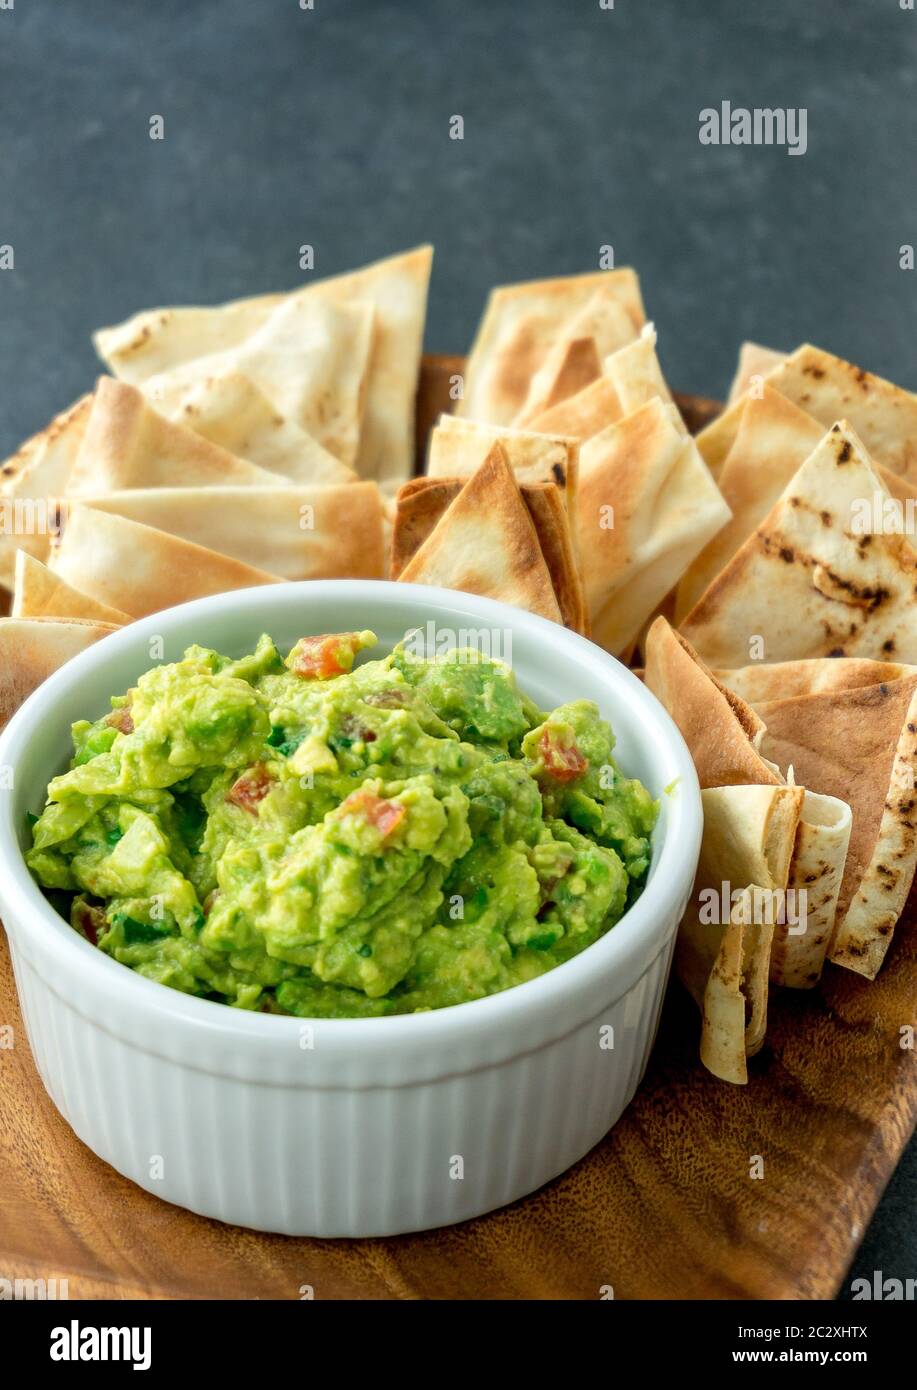 Guacamole vertical view. Guacamole is a avocado based dip, traditionally a mexican (Aztecs) dish. Healthy and easy to make snack at home. Stock Photo